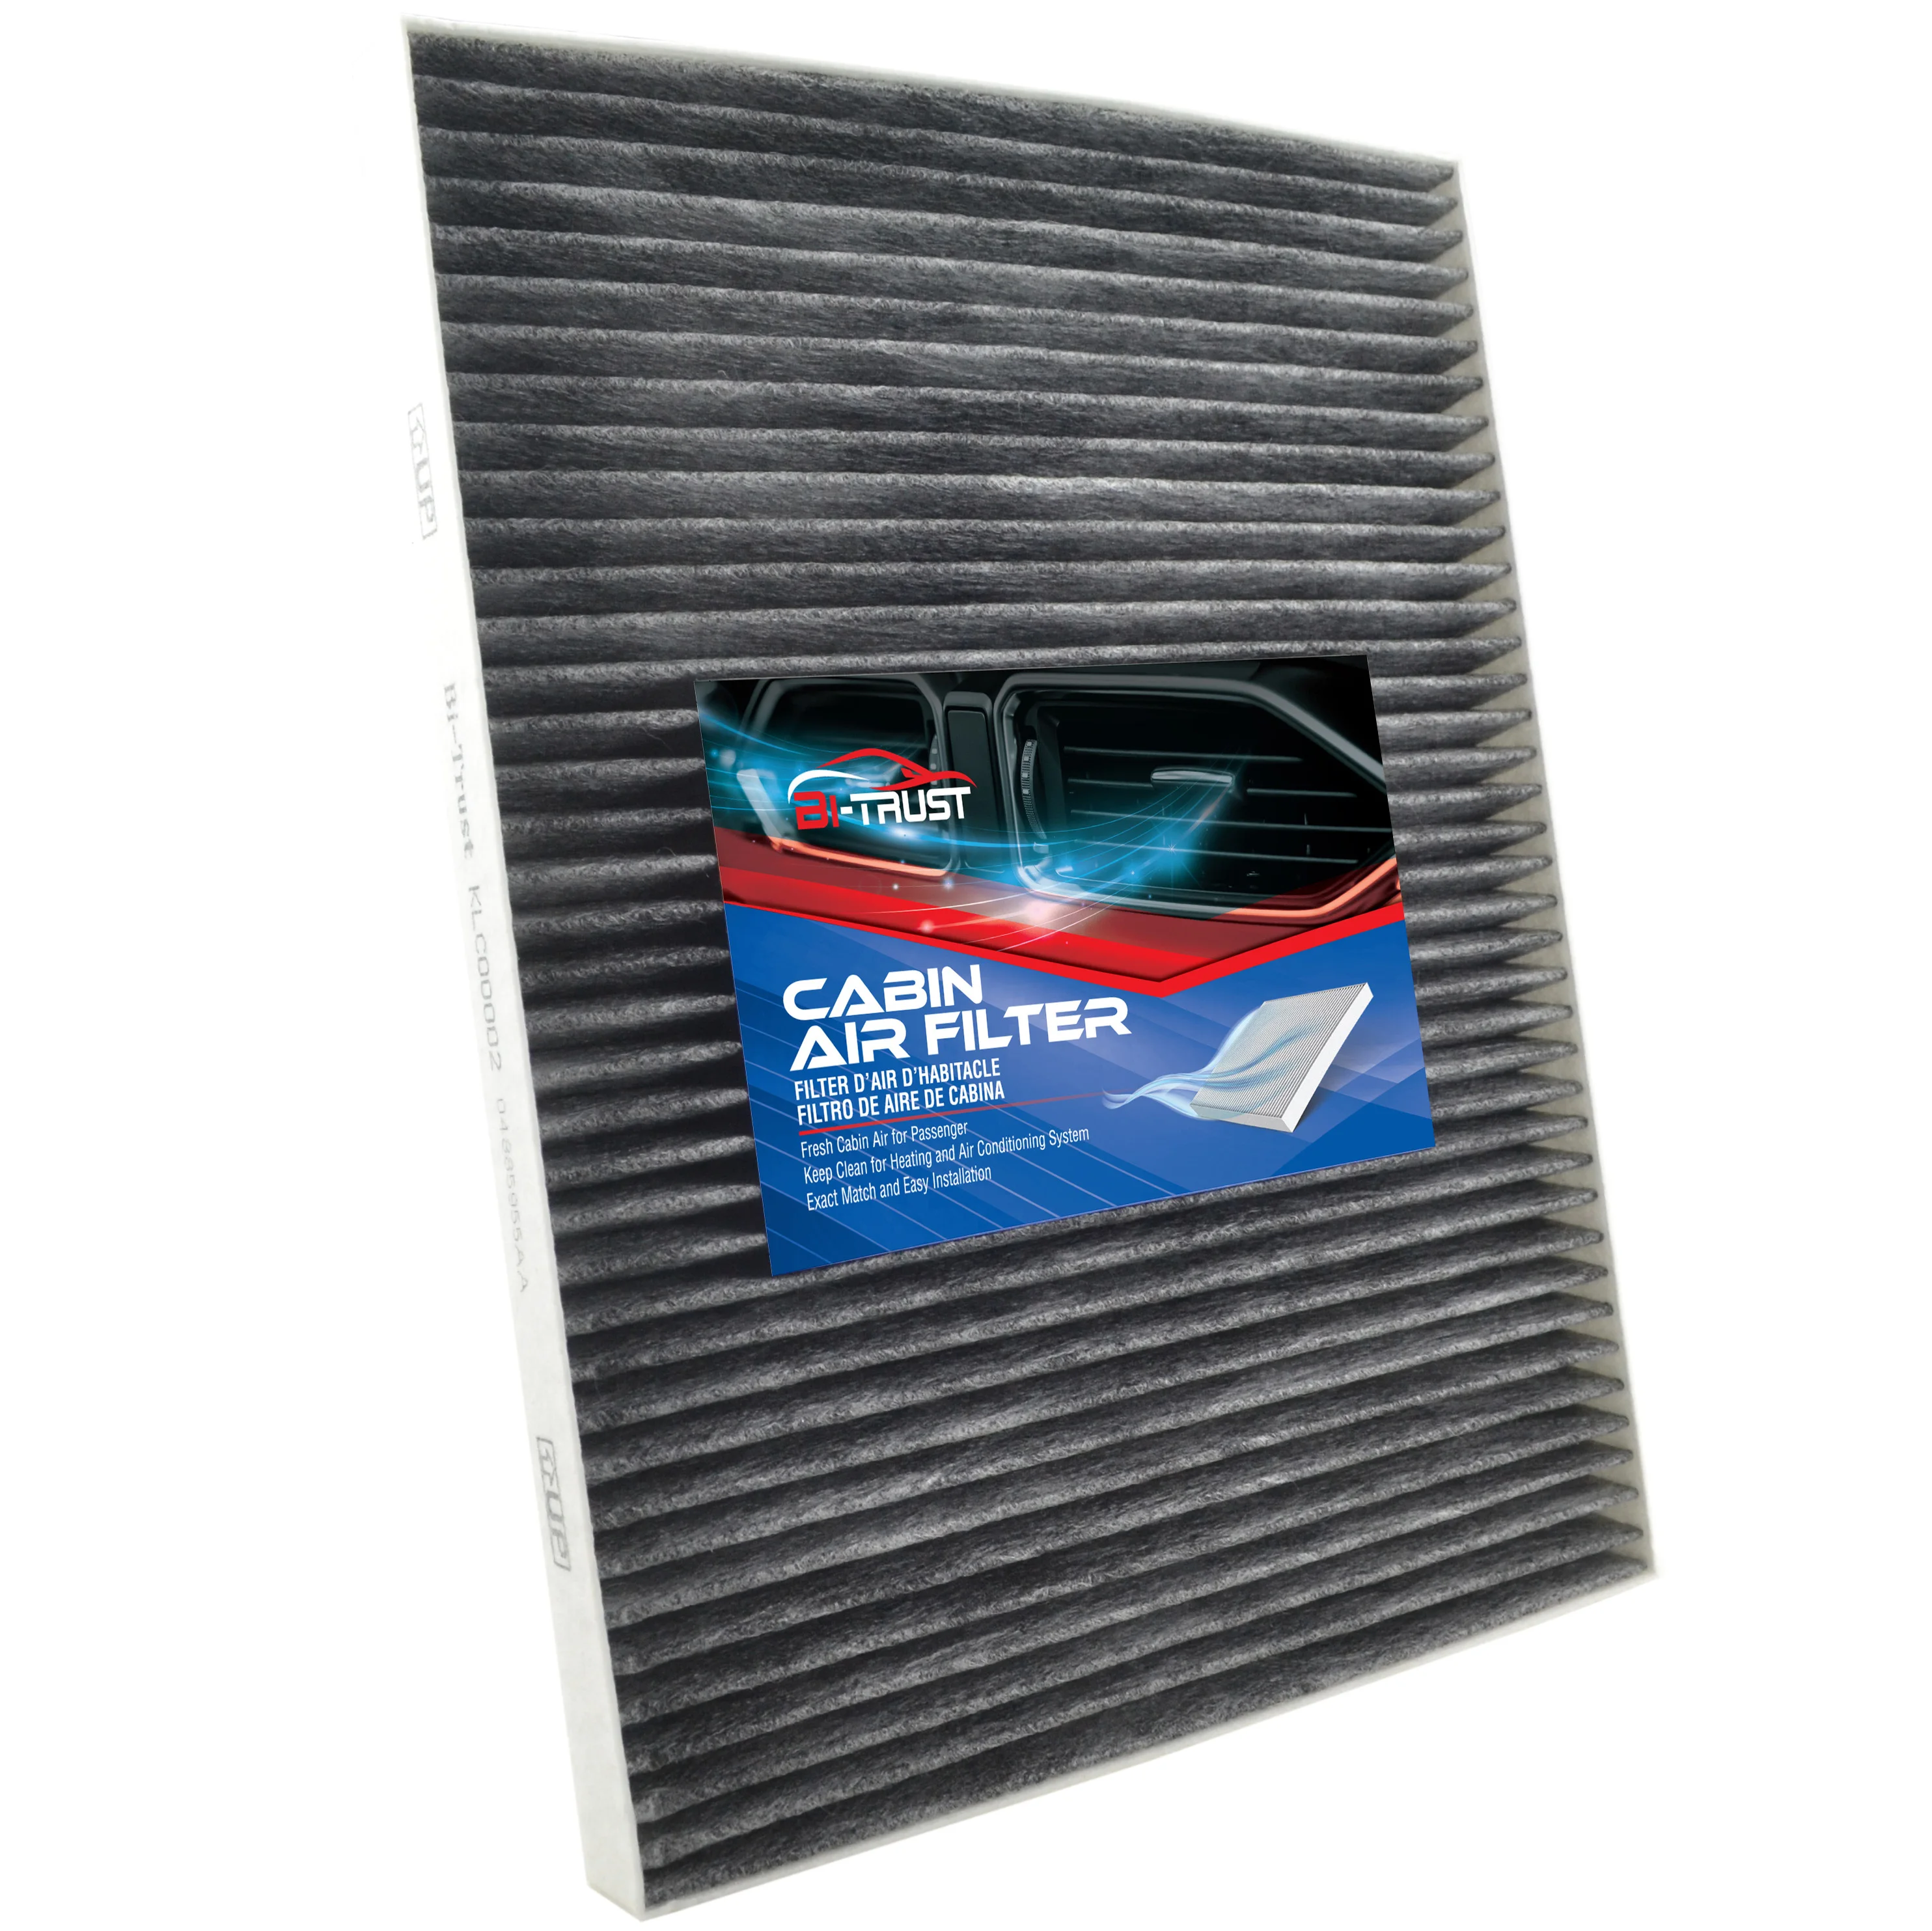 

Bi-Trust Cabin Air Filter for Chrysler Grand Voyager Pacifica Town & Country Voyager Dodge Caravan Plymouth Grand Voyager